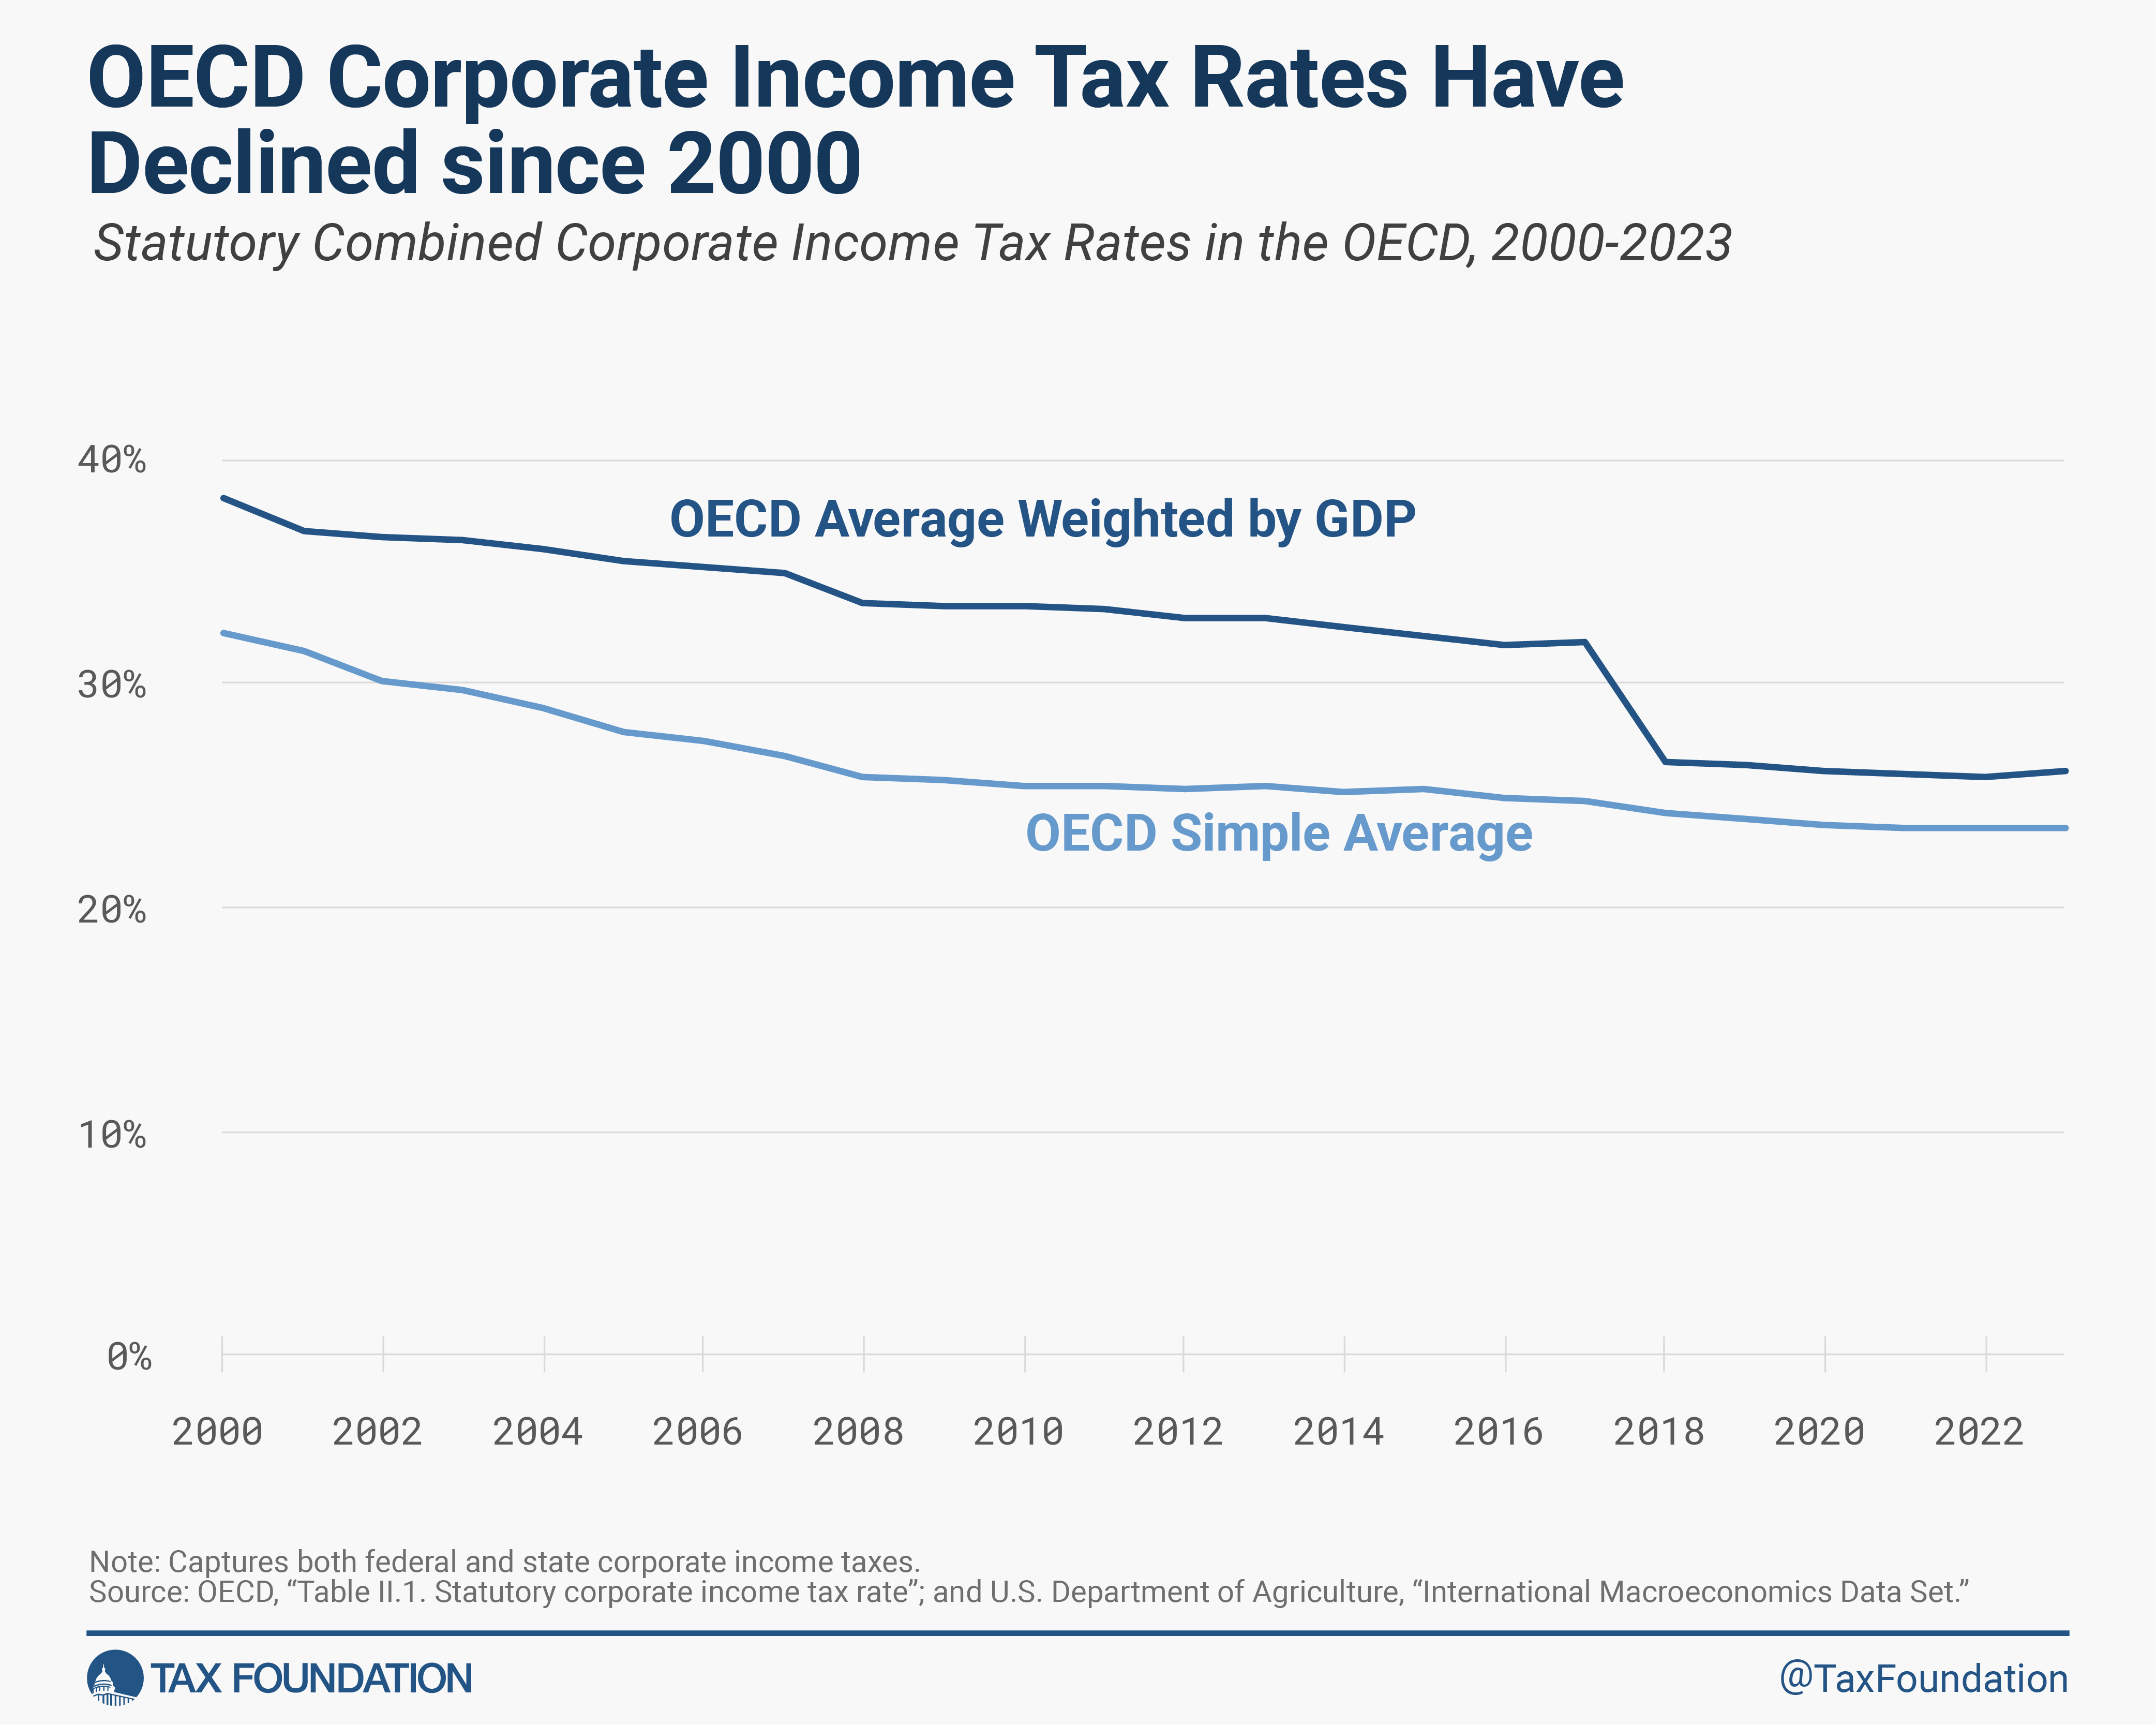 OECD Corporate Income Tax Rates Have Declined since 2000